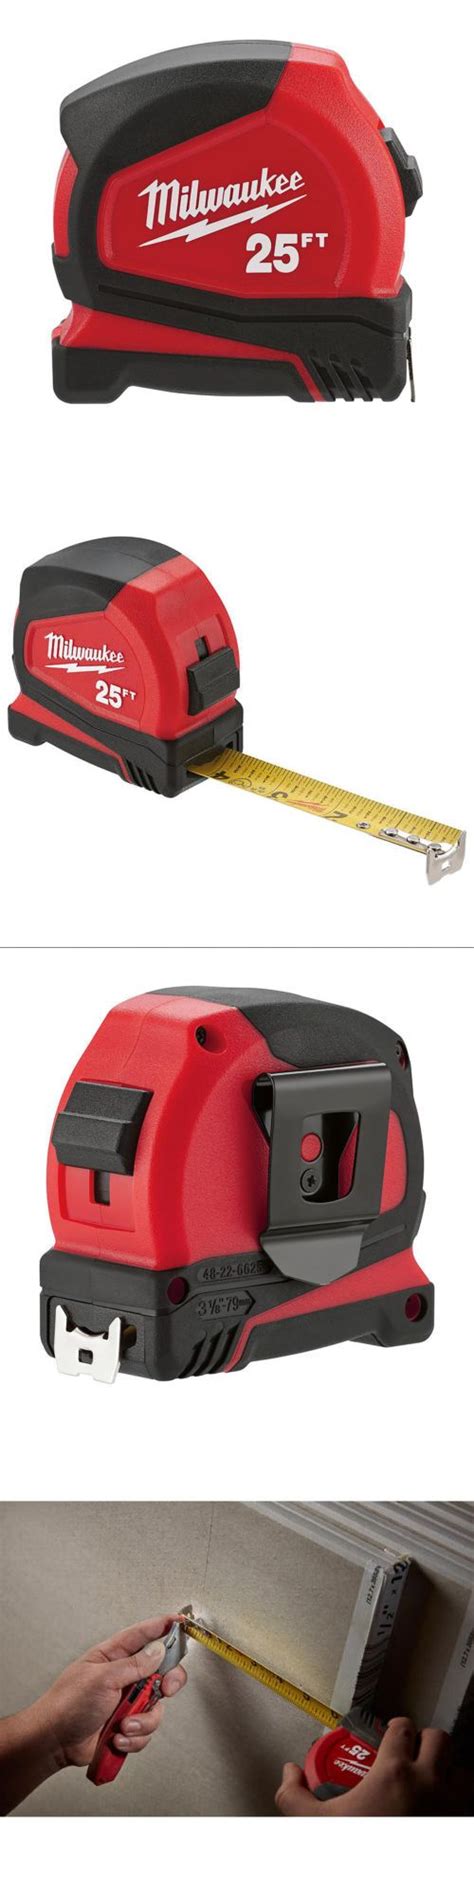 Measuring Tapes And Rulers Milwaukee Tape Measure Ft Heavy Duty Compact Auto Lock